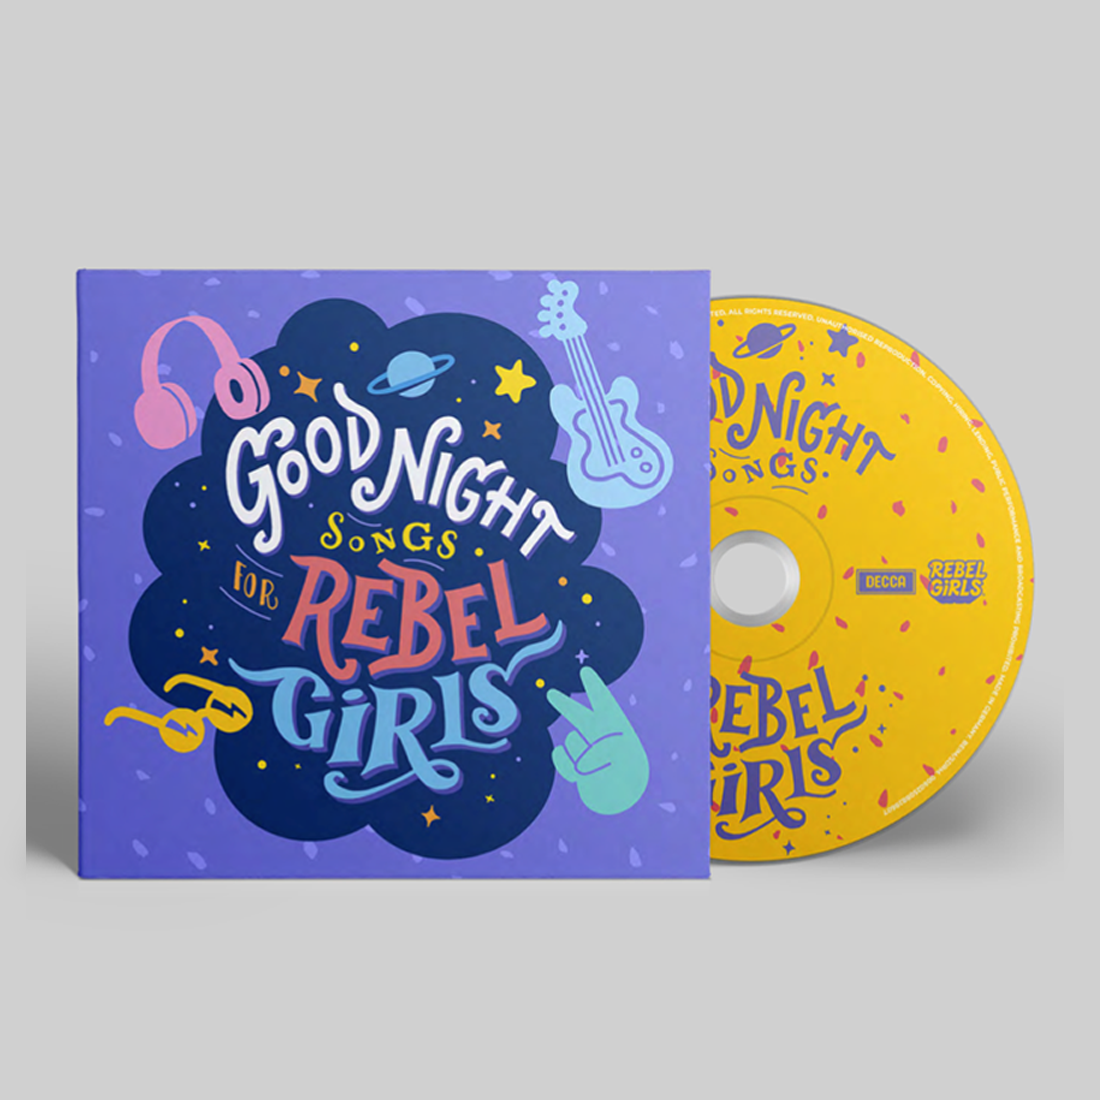 Goodnight Songs For Rebel Girls: Exclusive Signed "Lucky Dip" CD